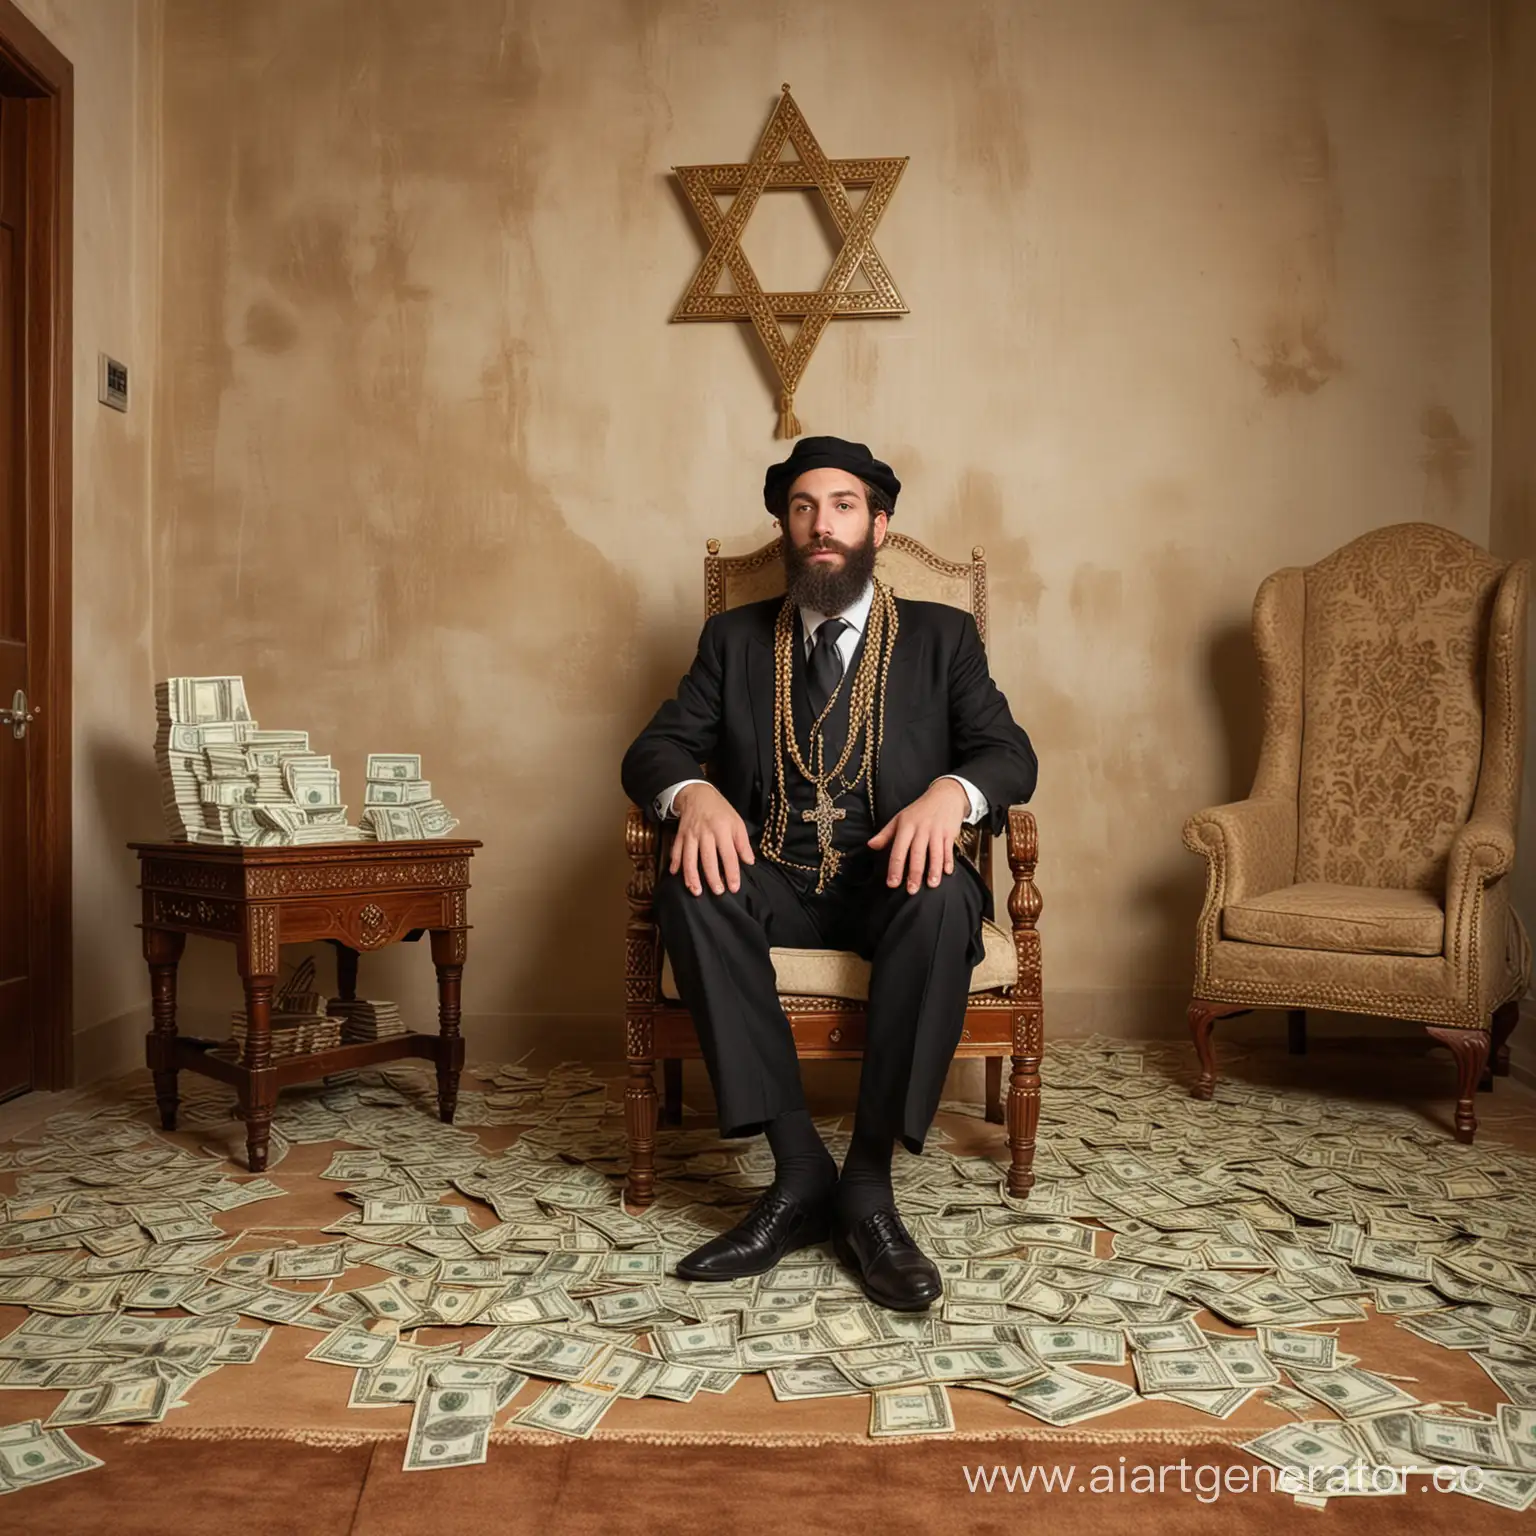 Wealthy-Jewish-Man-Adorned-with-the-Star-of-David-Surrounded-by-Opulence